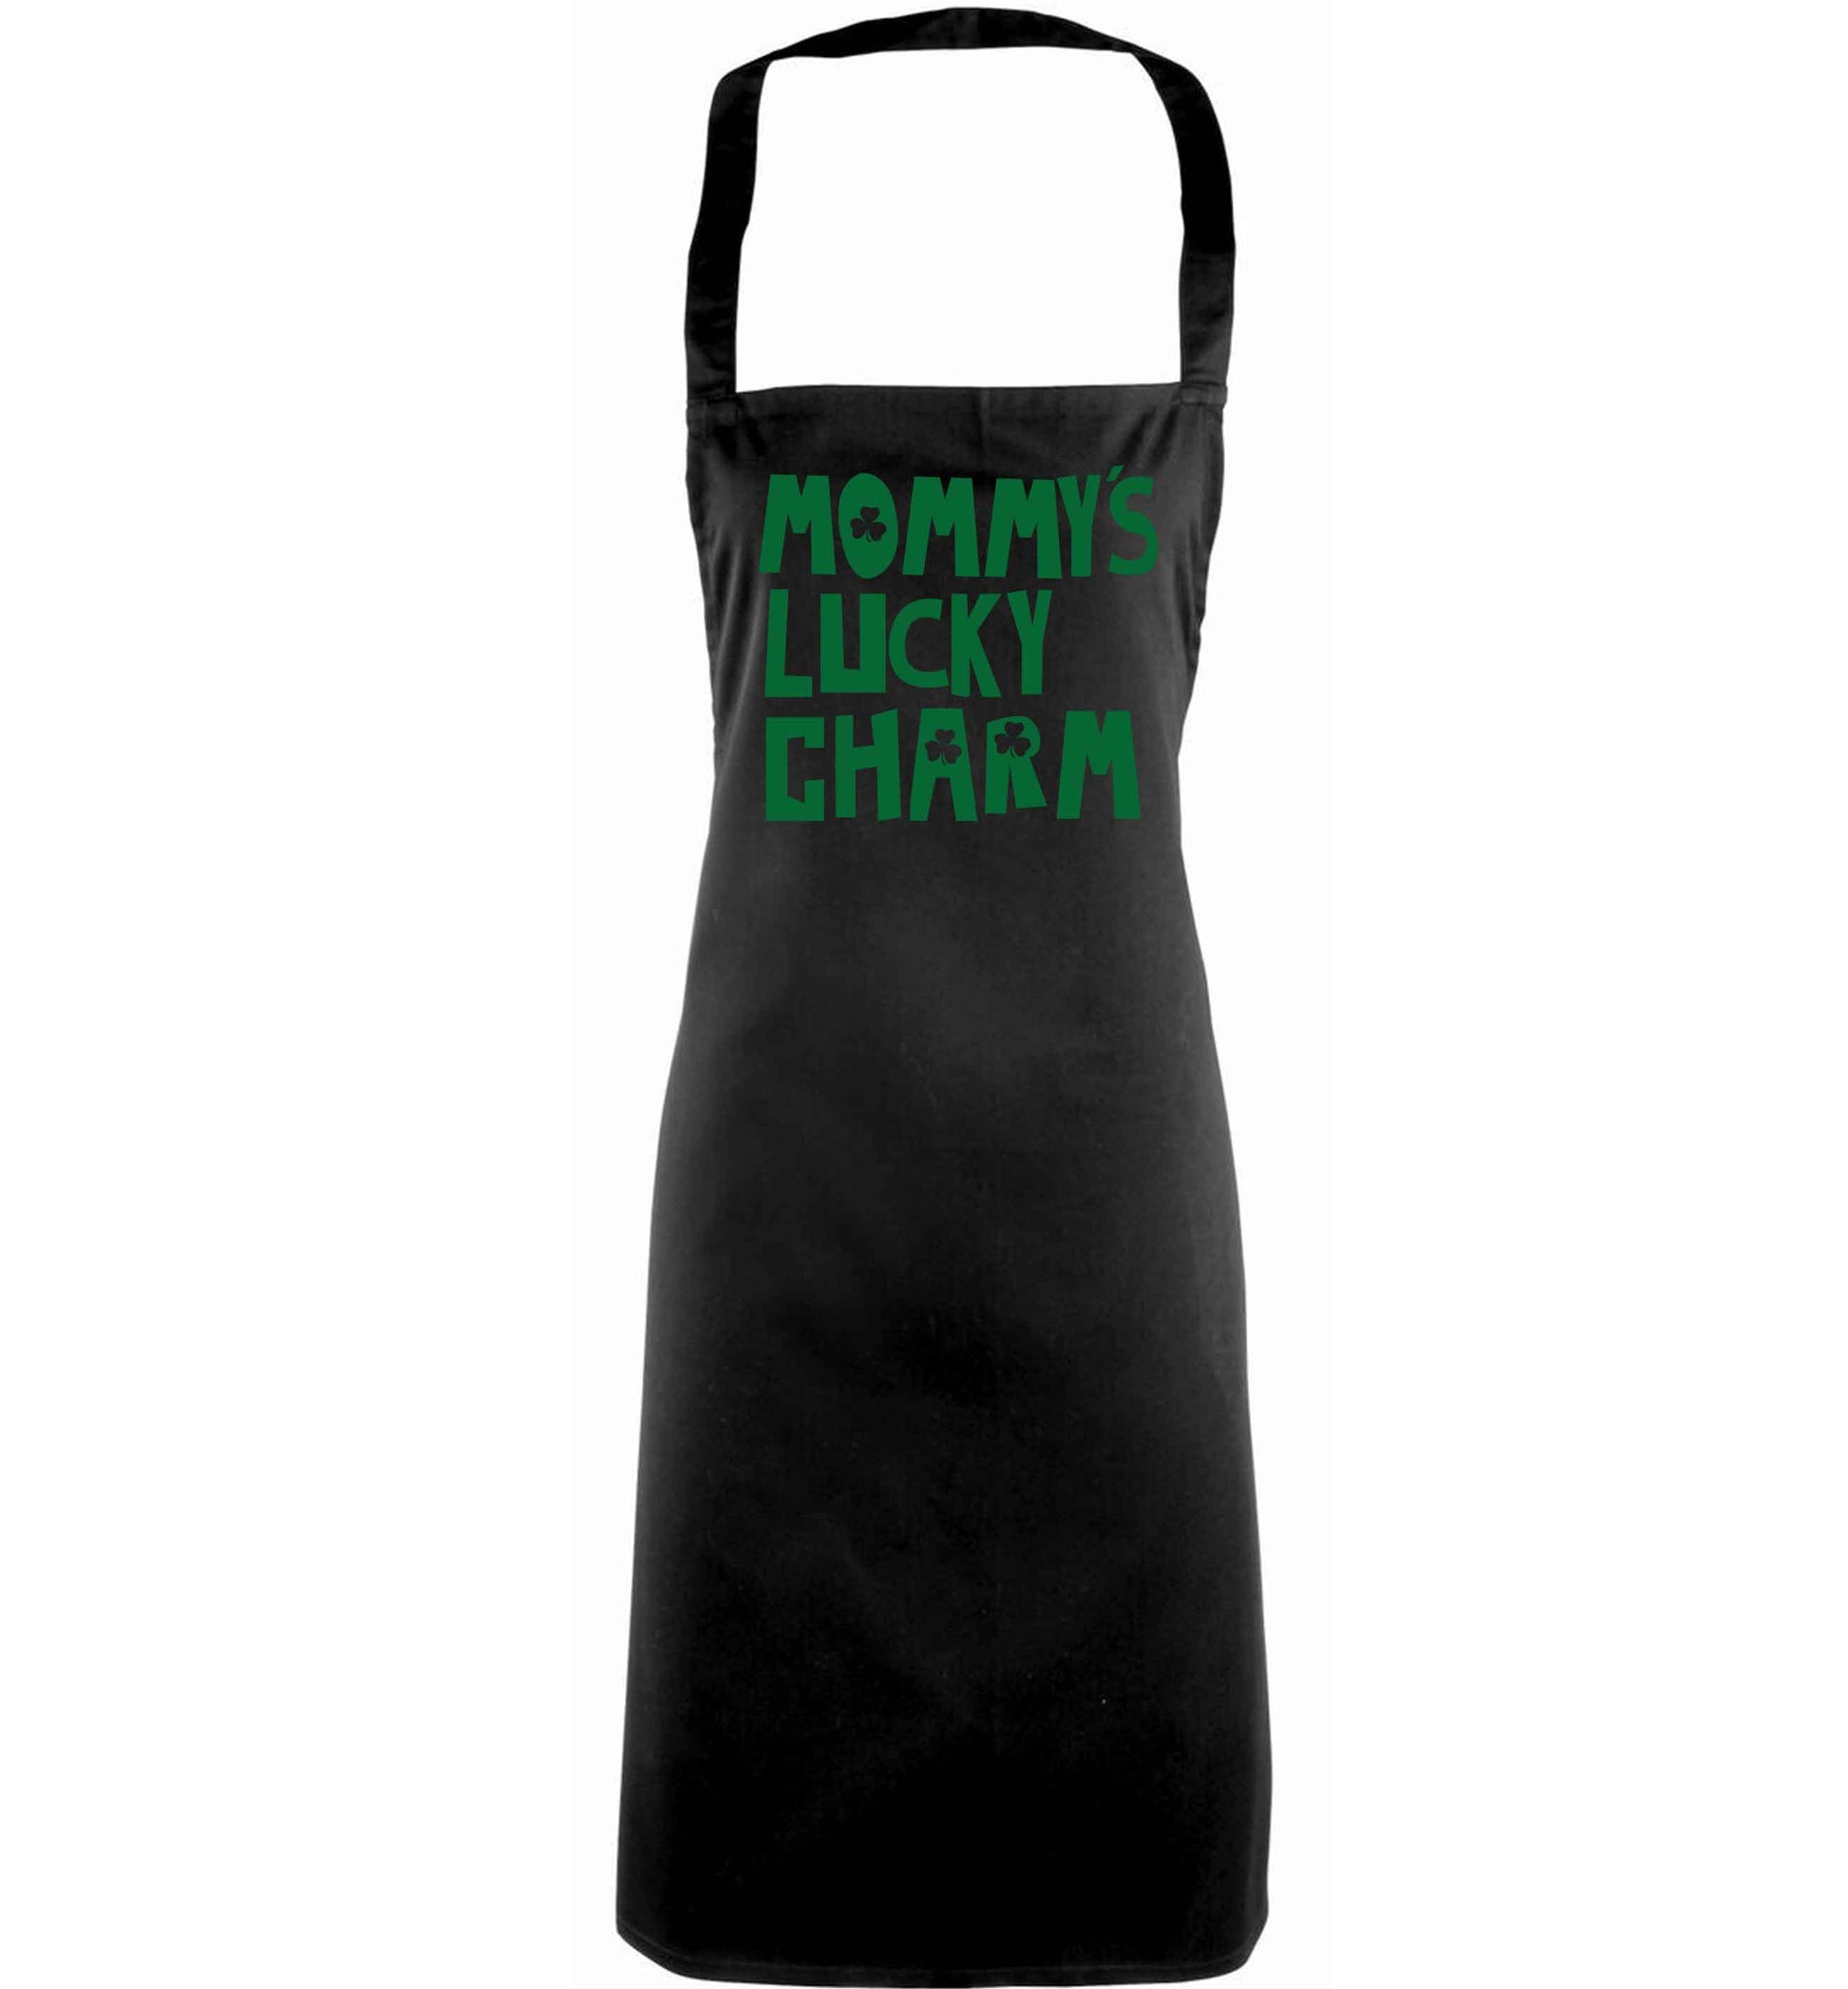 Mommy's lucky charm adults black apron